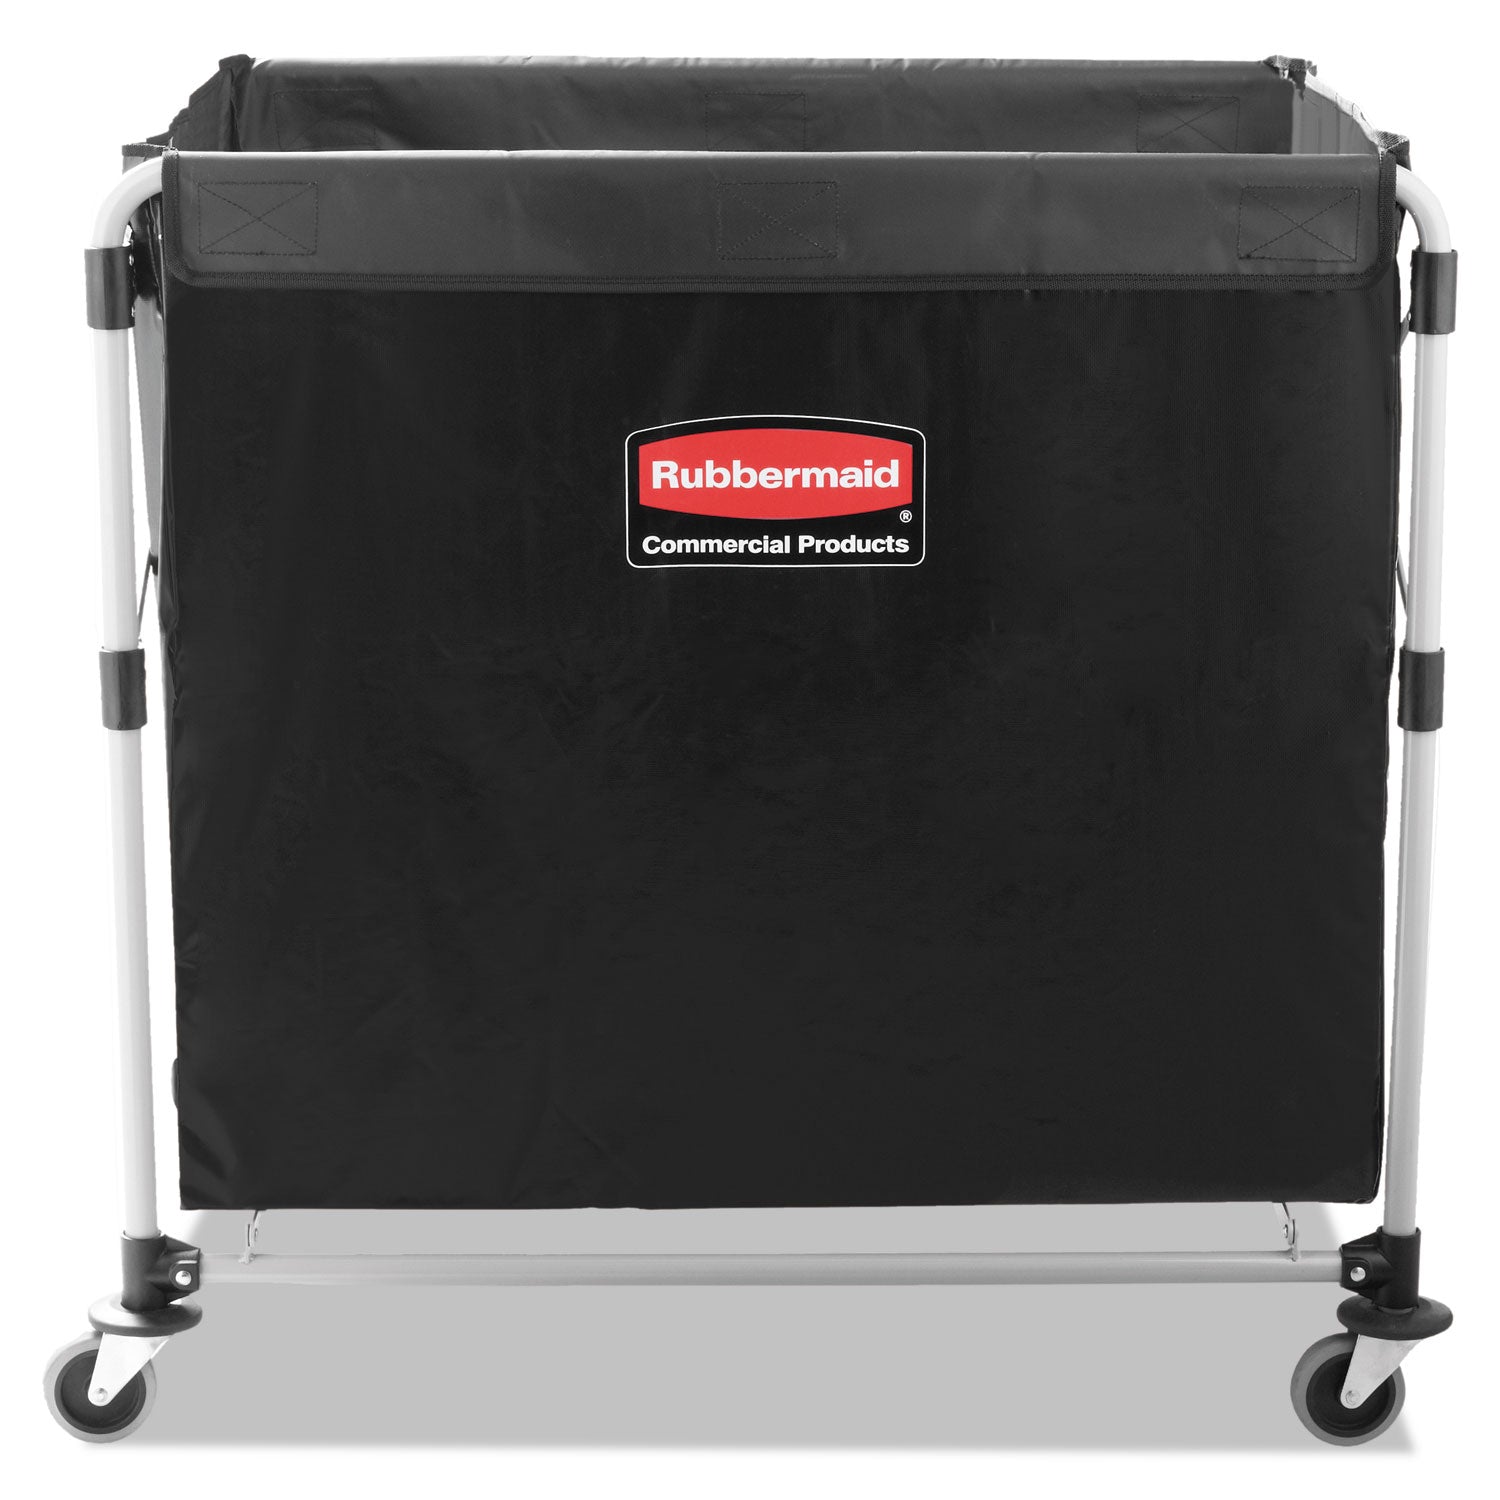 One-Compartment Collapsible X-Cart, Synthetic Fabric, 9.96 cu ft Bin, 24.1" x 35.7" x 34", Black/Silver - 